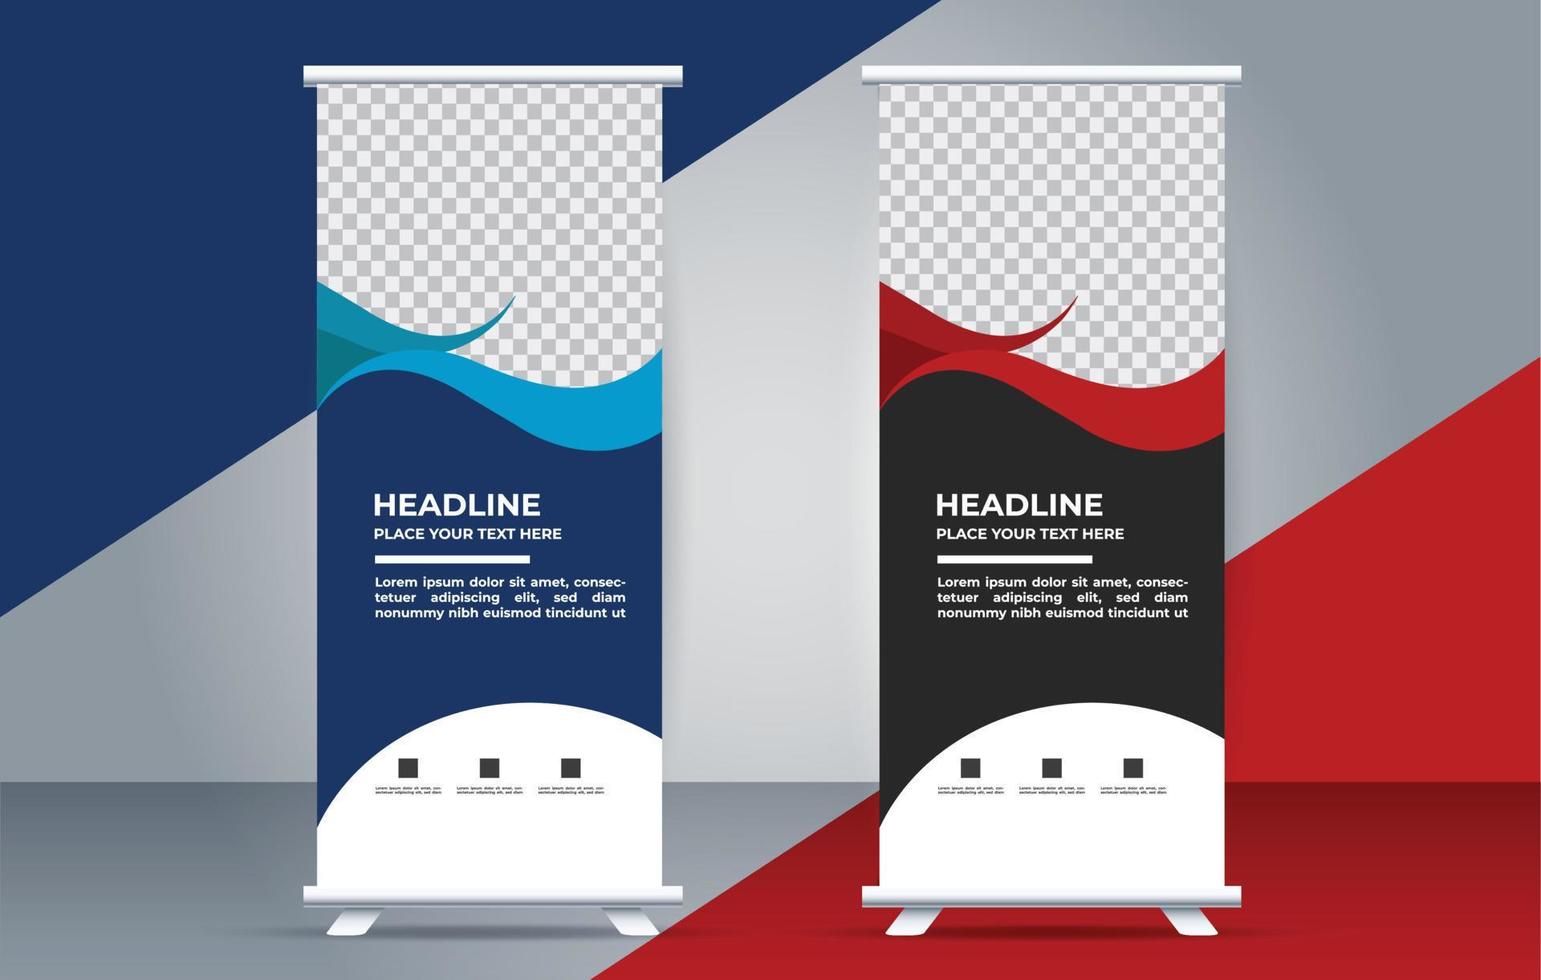 creative Roll up banner template with modern shapes vector